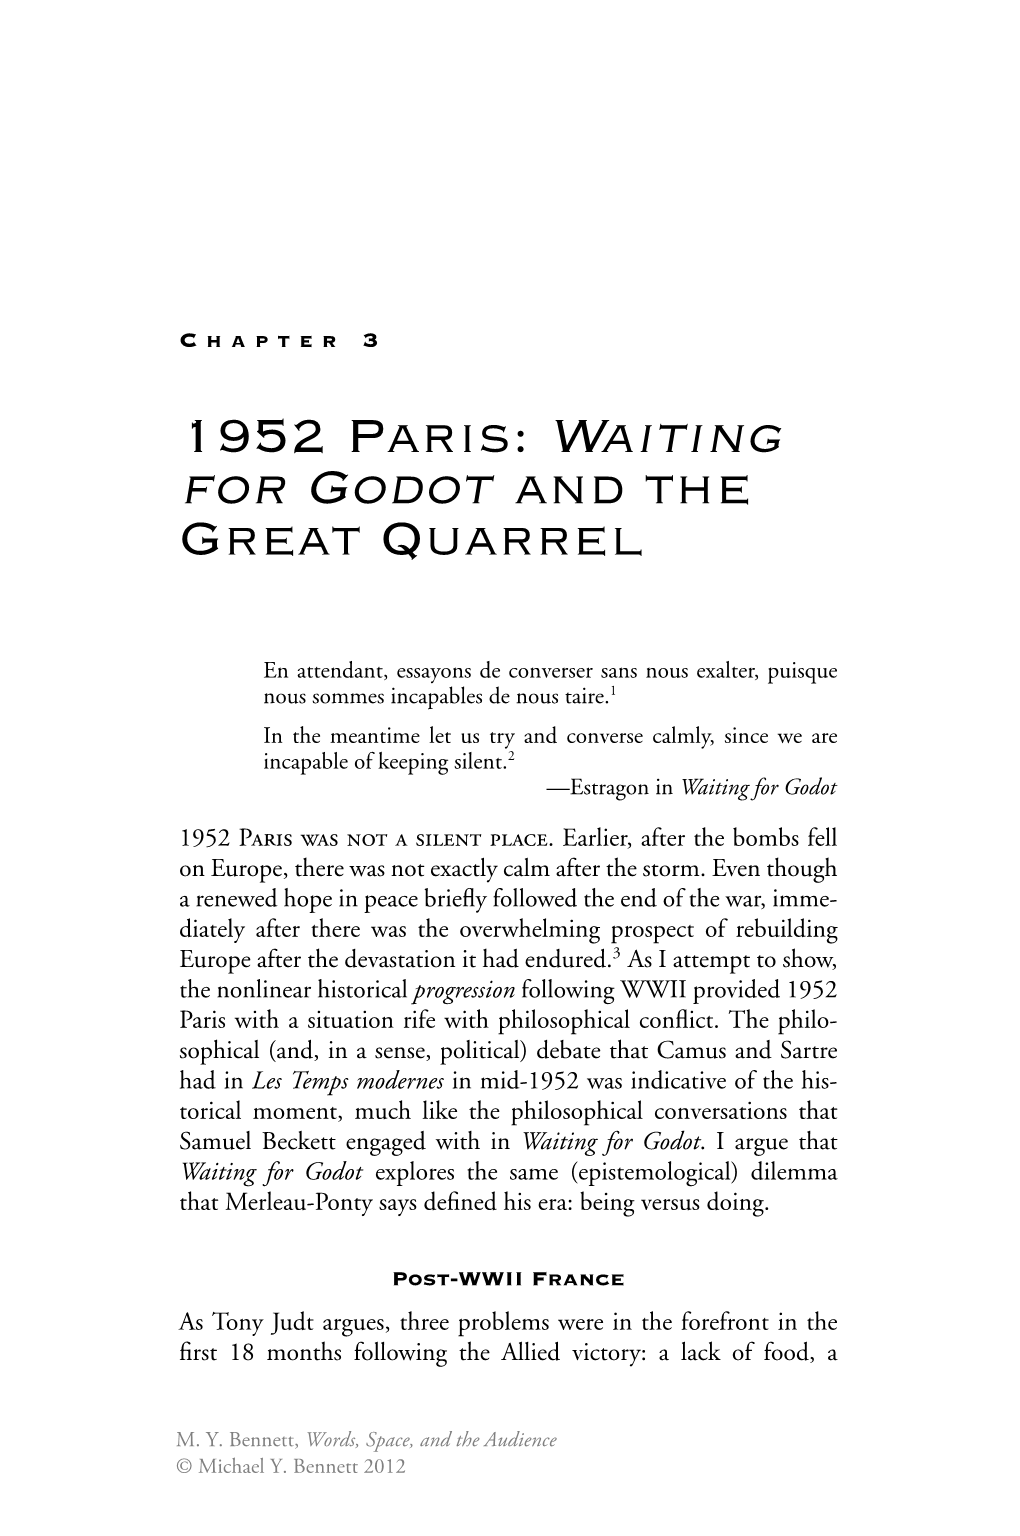 1952 Paris: Waiting for Godot and the Great Quarrel